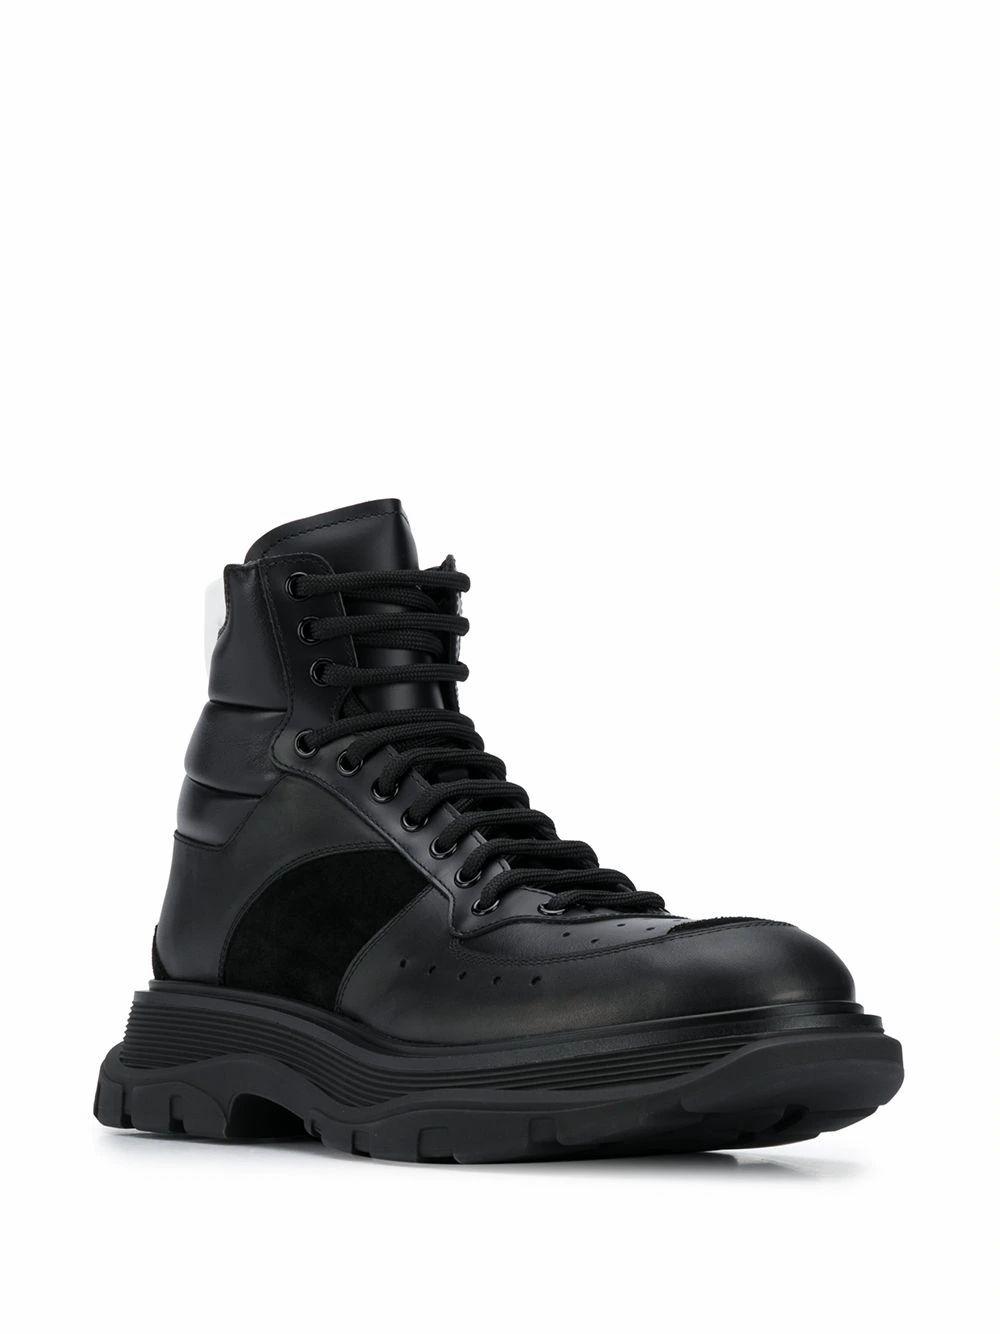 Alexander McQueen Leather Ankle Boots in Black for Men - Lyst